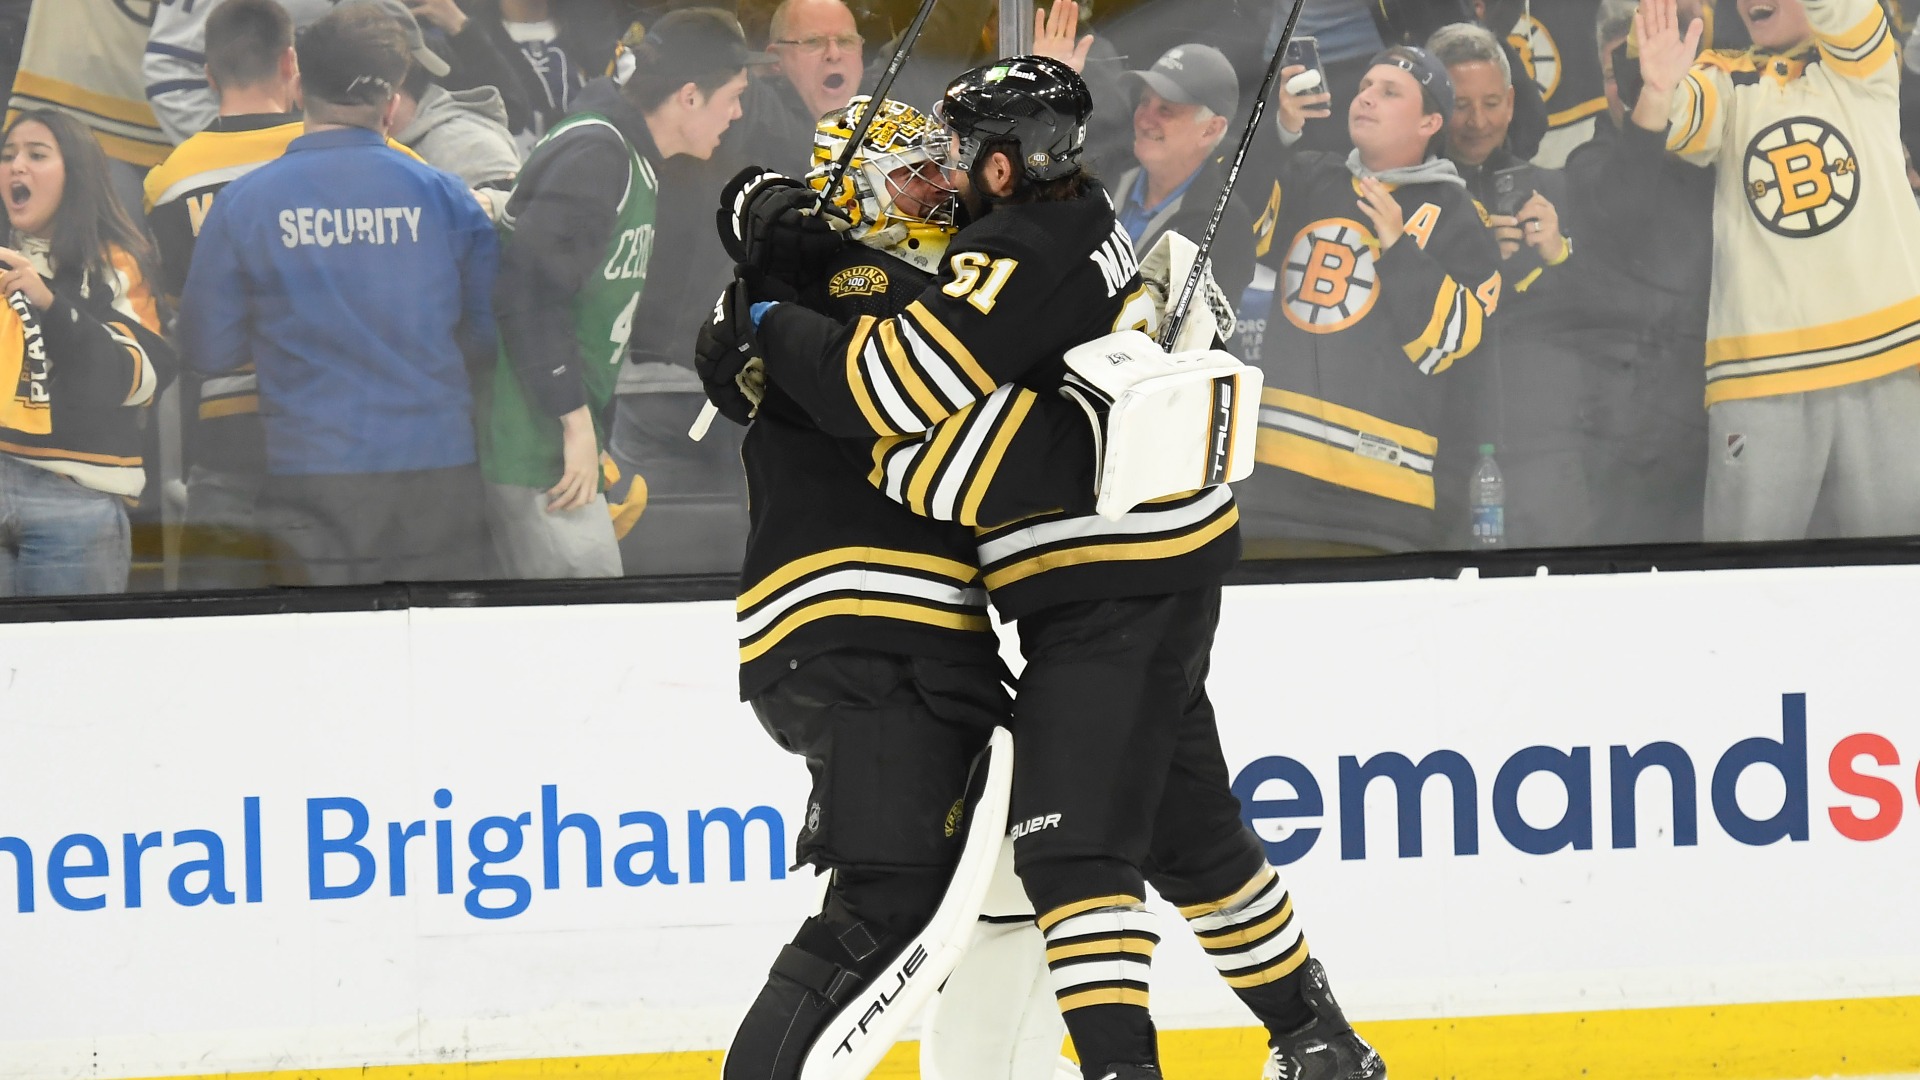 Pat Maroon Confidently Shares Bruins Take After Season Ends